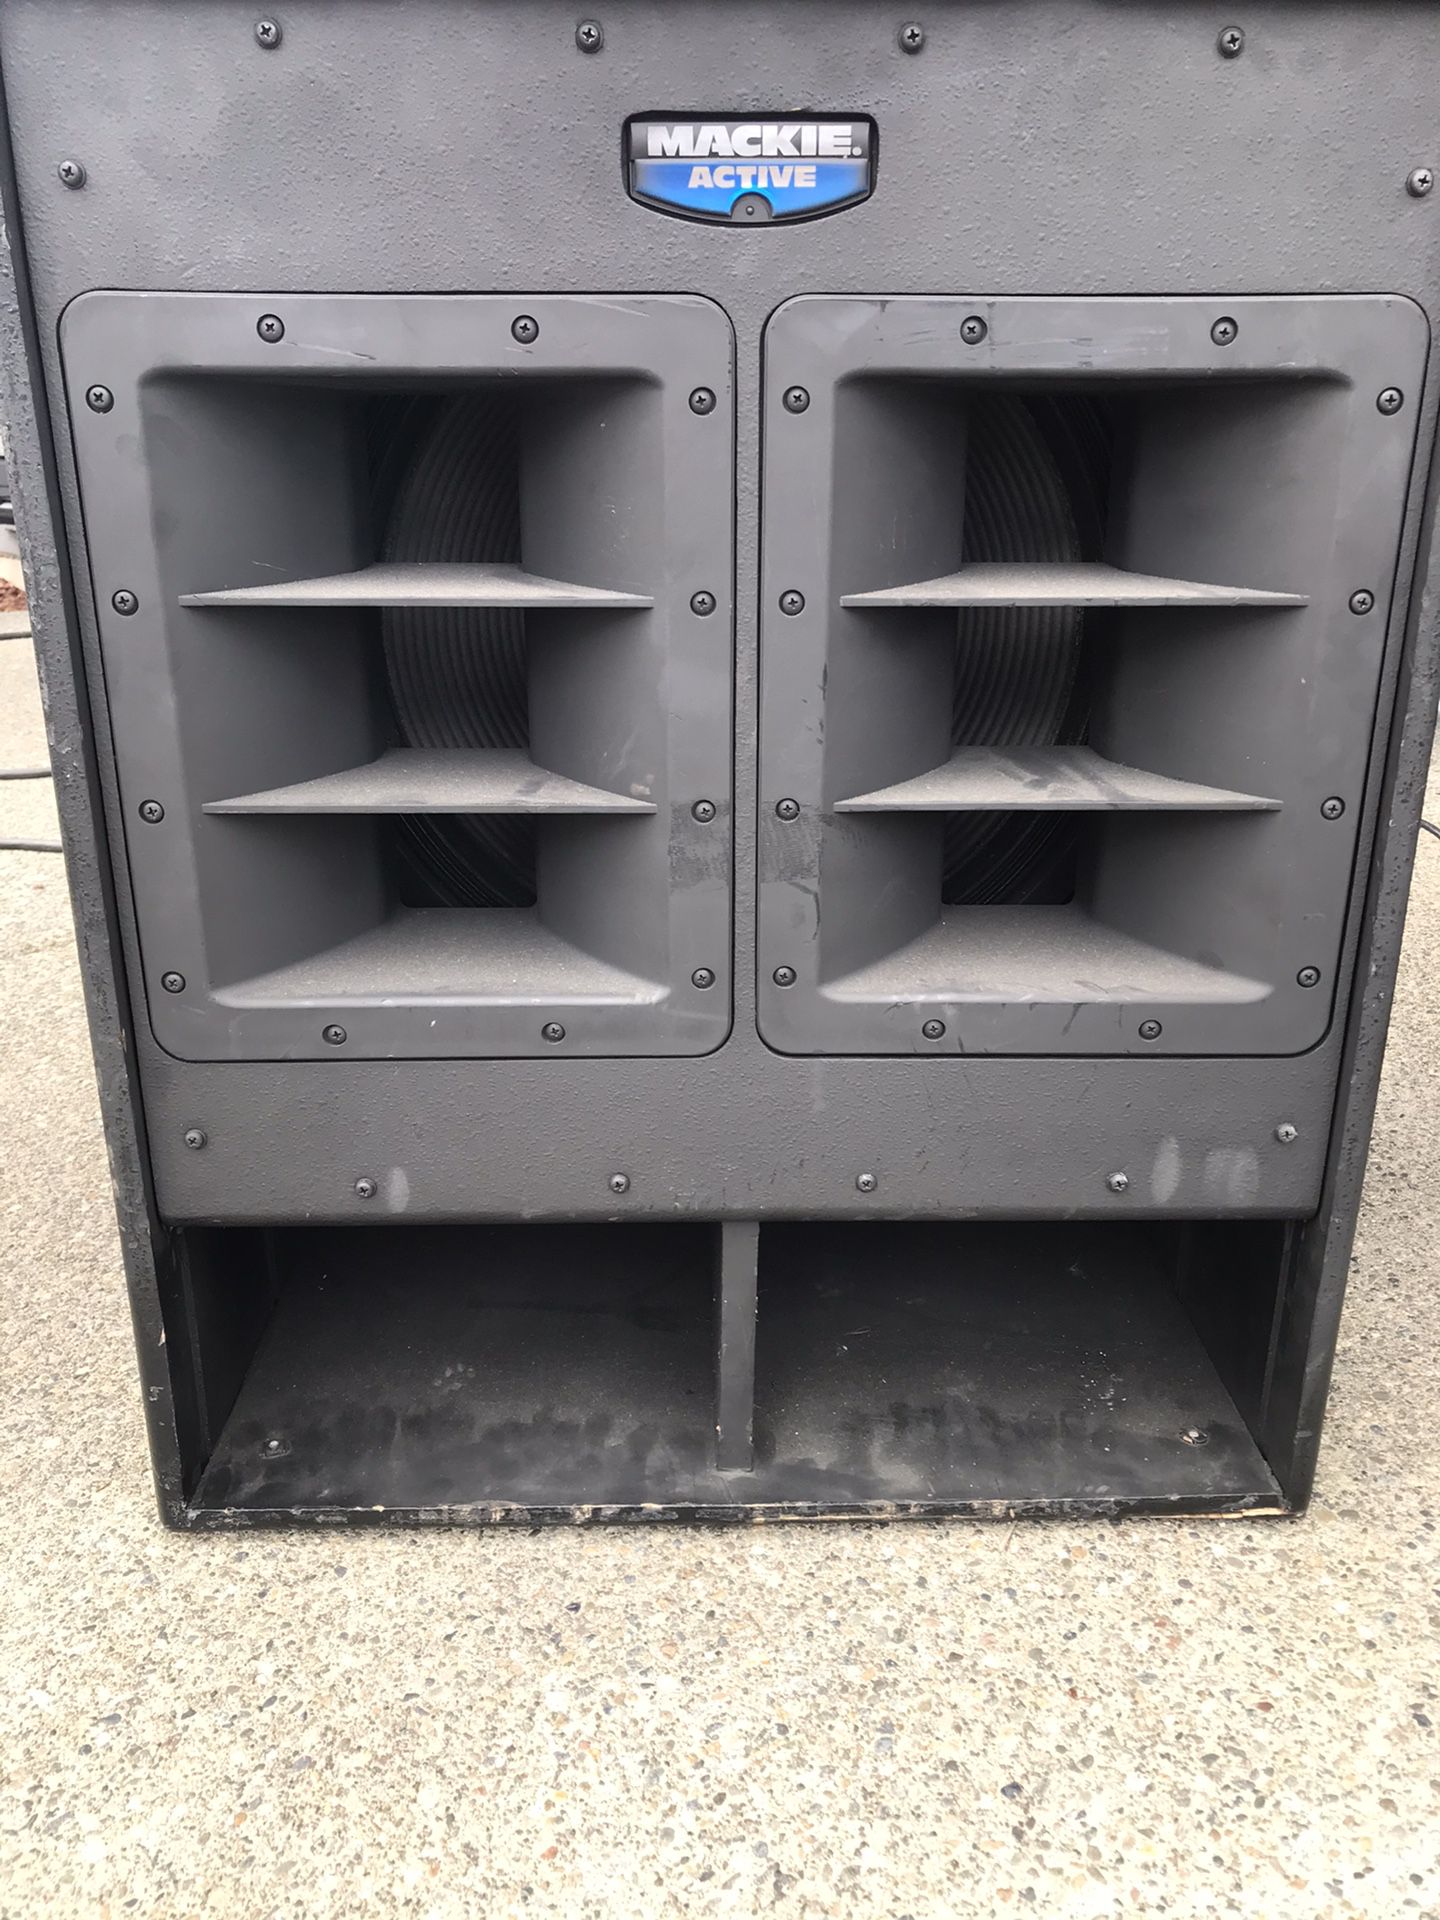 Mackie SWA1801 18” powered subwoofer for Sale in Yelm, WA - OfferUp